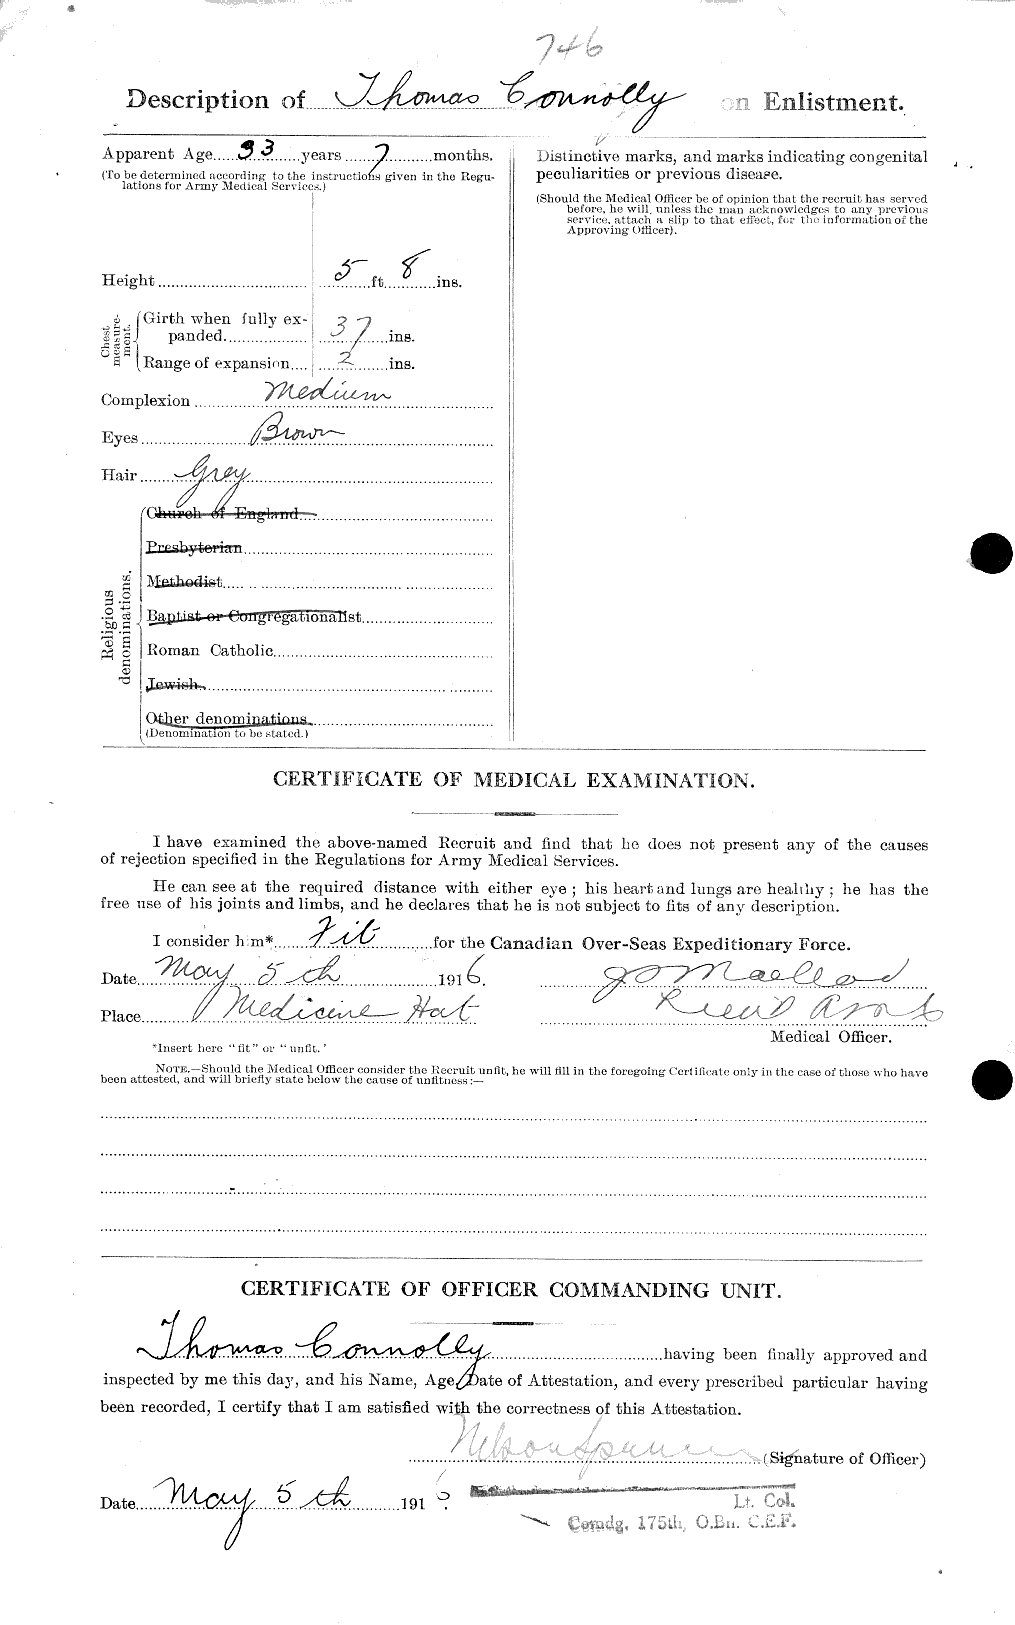 Personnel Records of the First World War - CEF 038216b